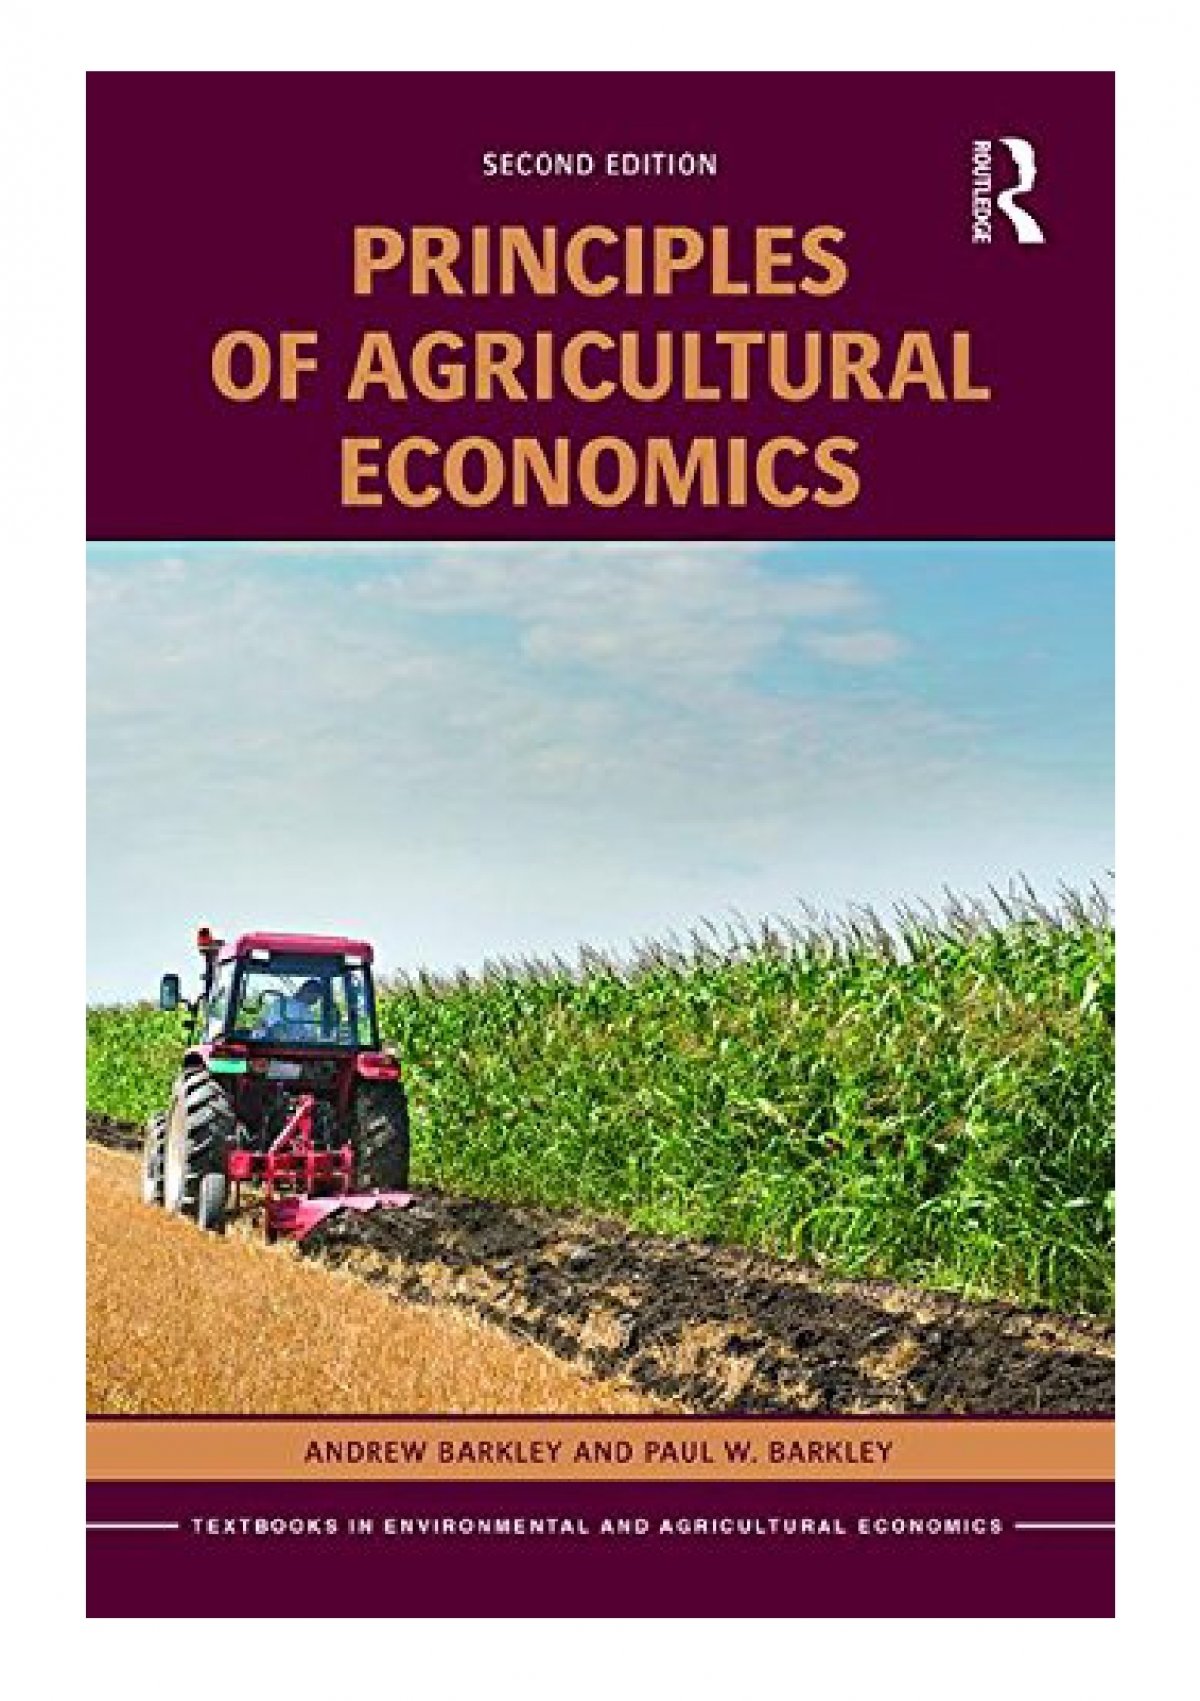 agricultural economics thesis pdf in india